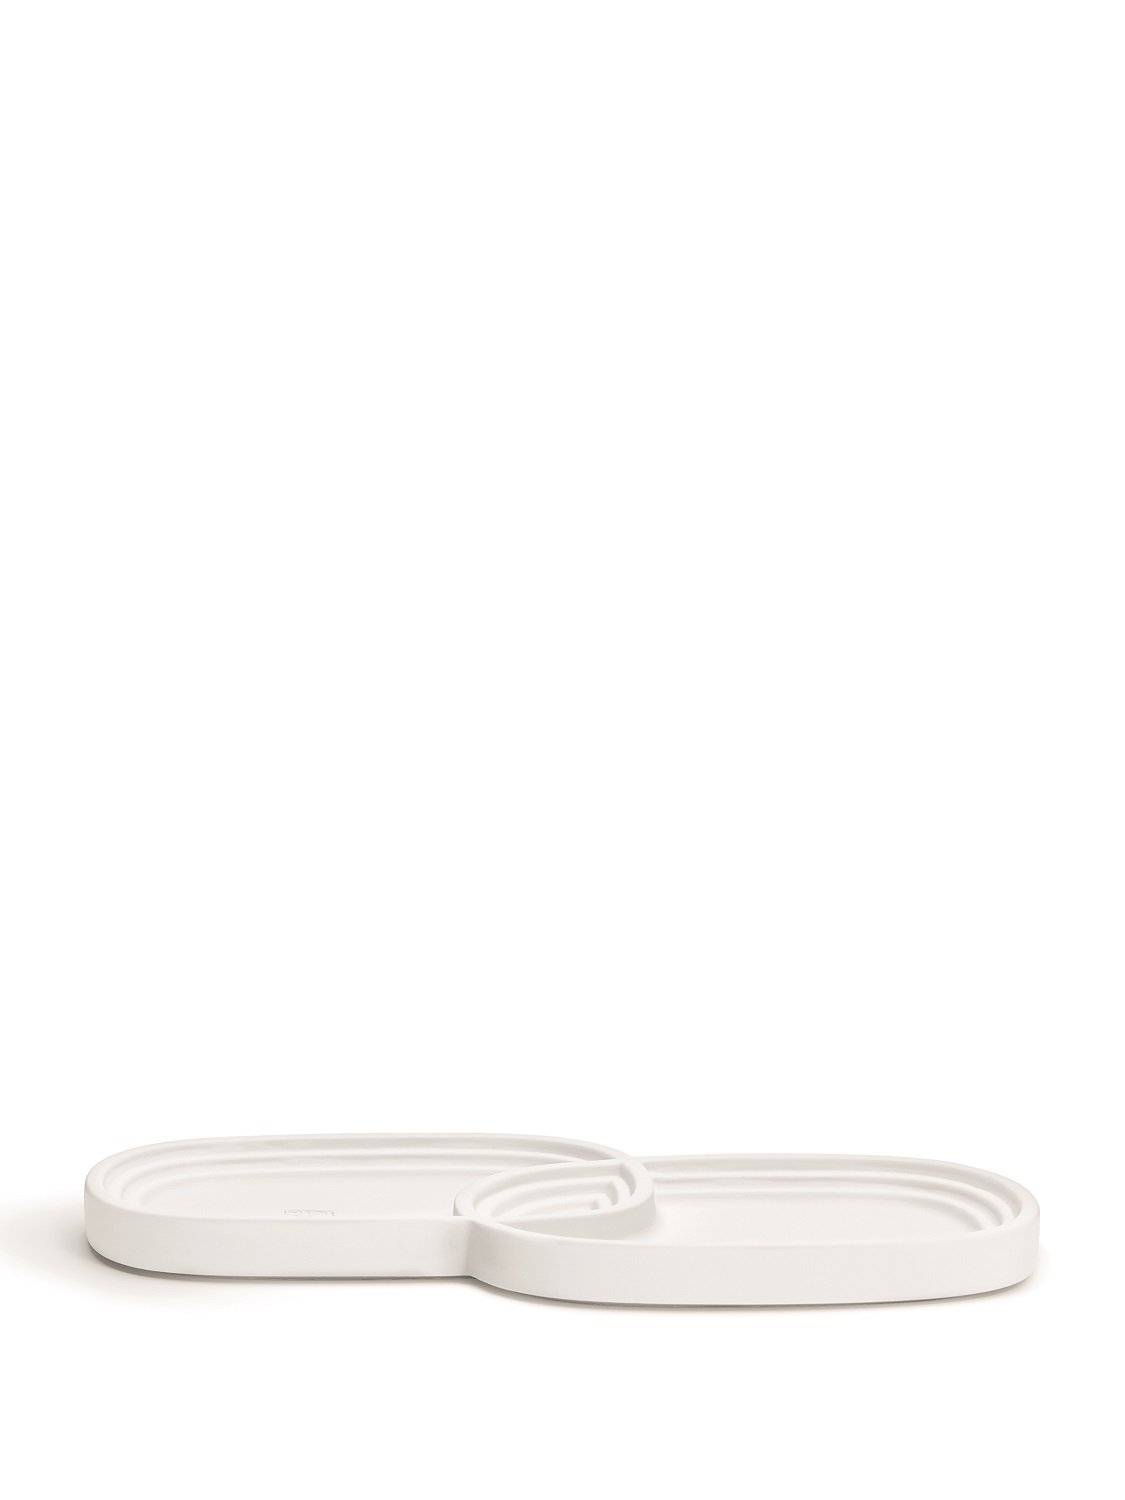 diptyque-ovale-large-tray-DECO01371-2.jpg